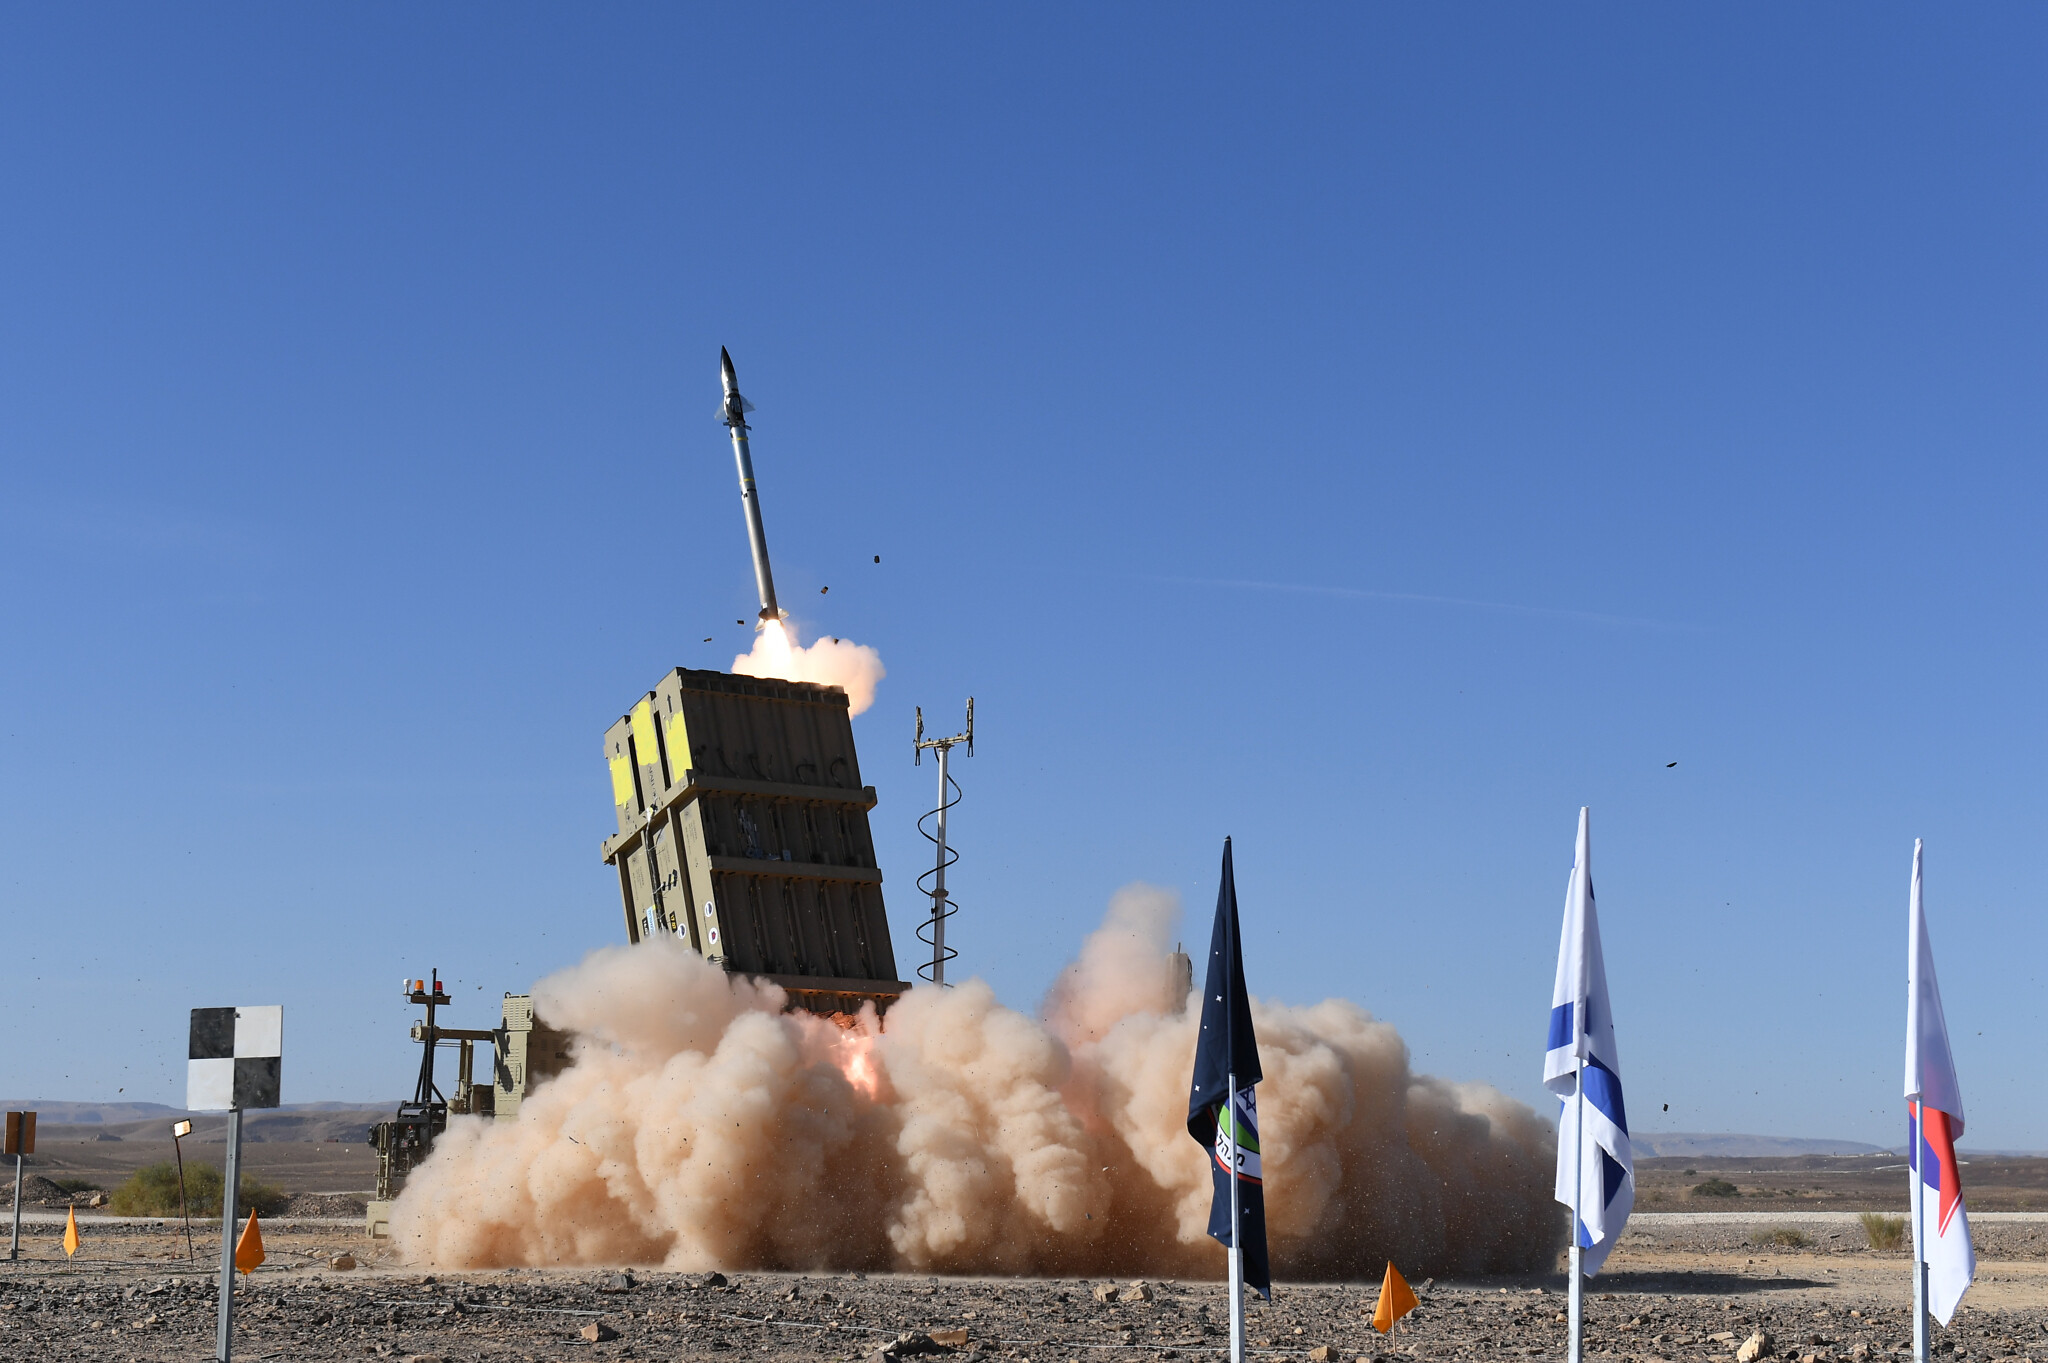 What is iron dome